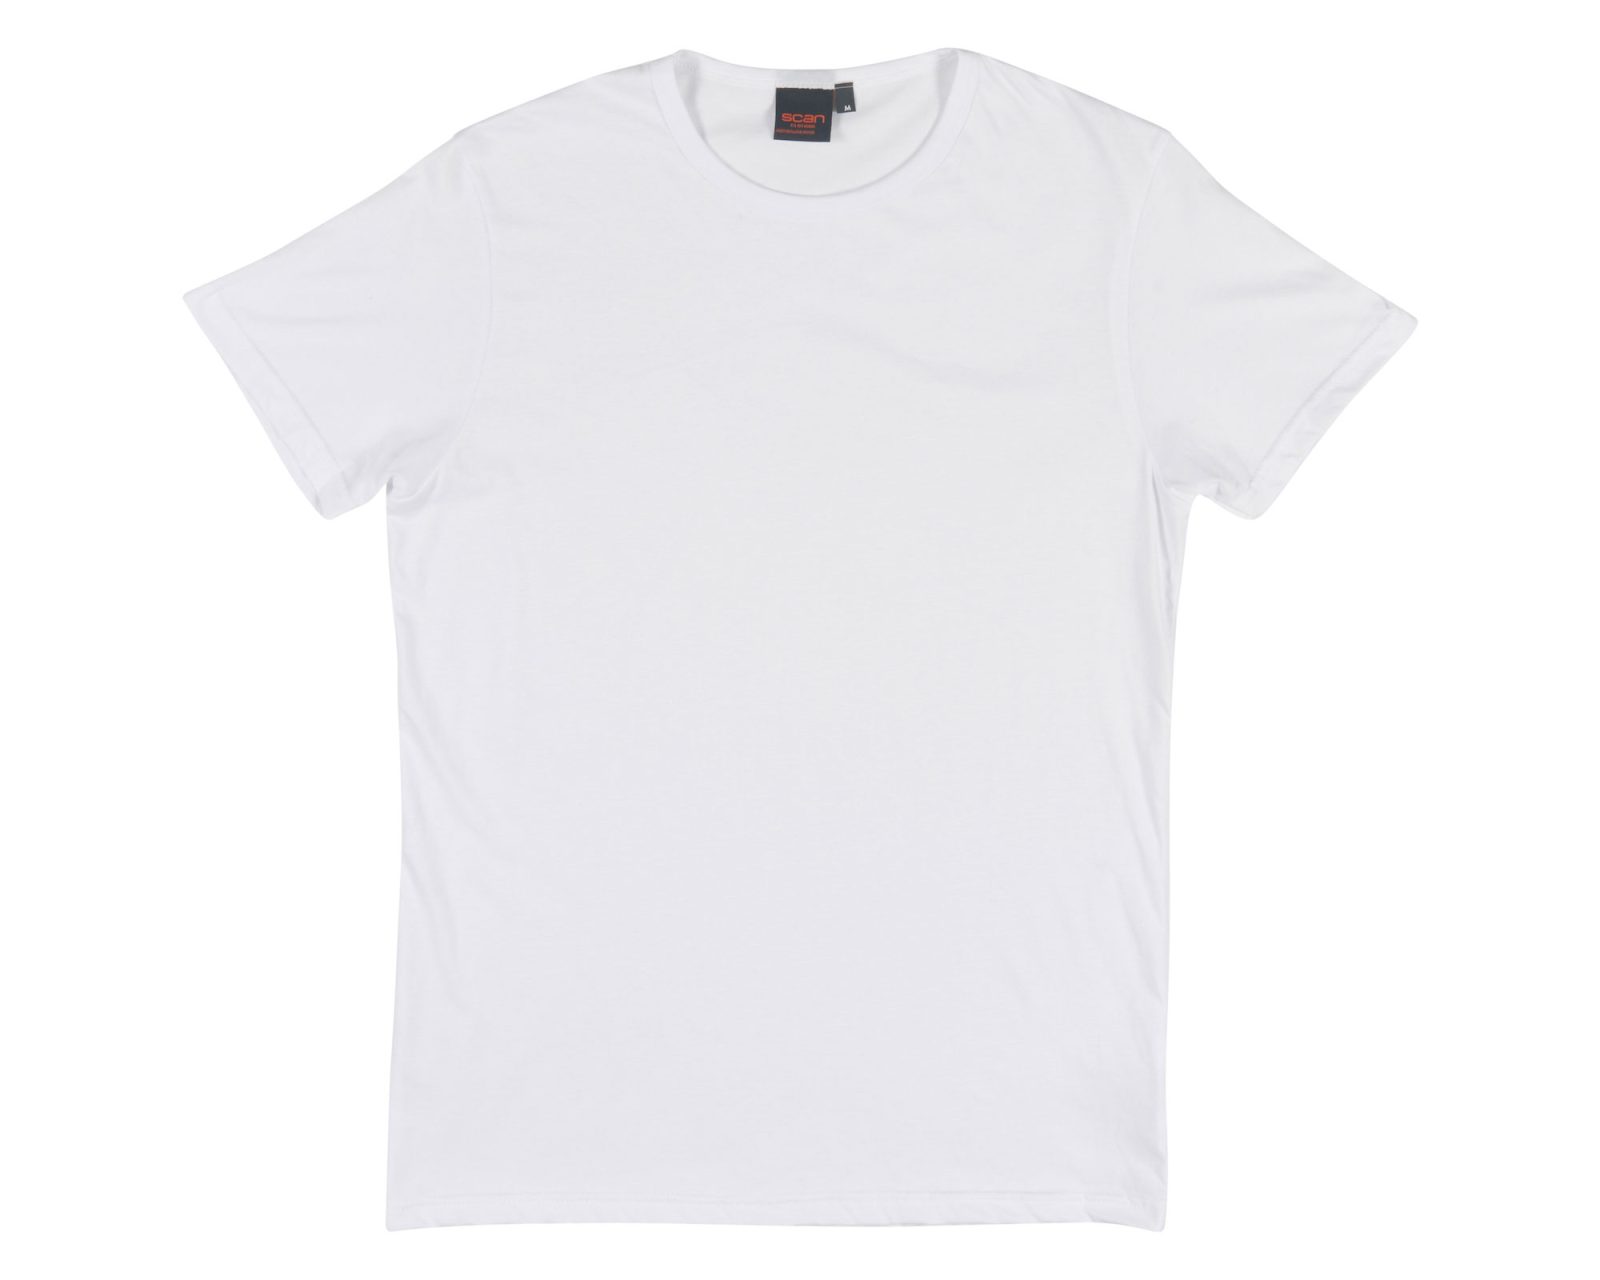 Qualitops Mens Fitted Short Sleeve Tee Australian made